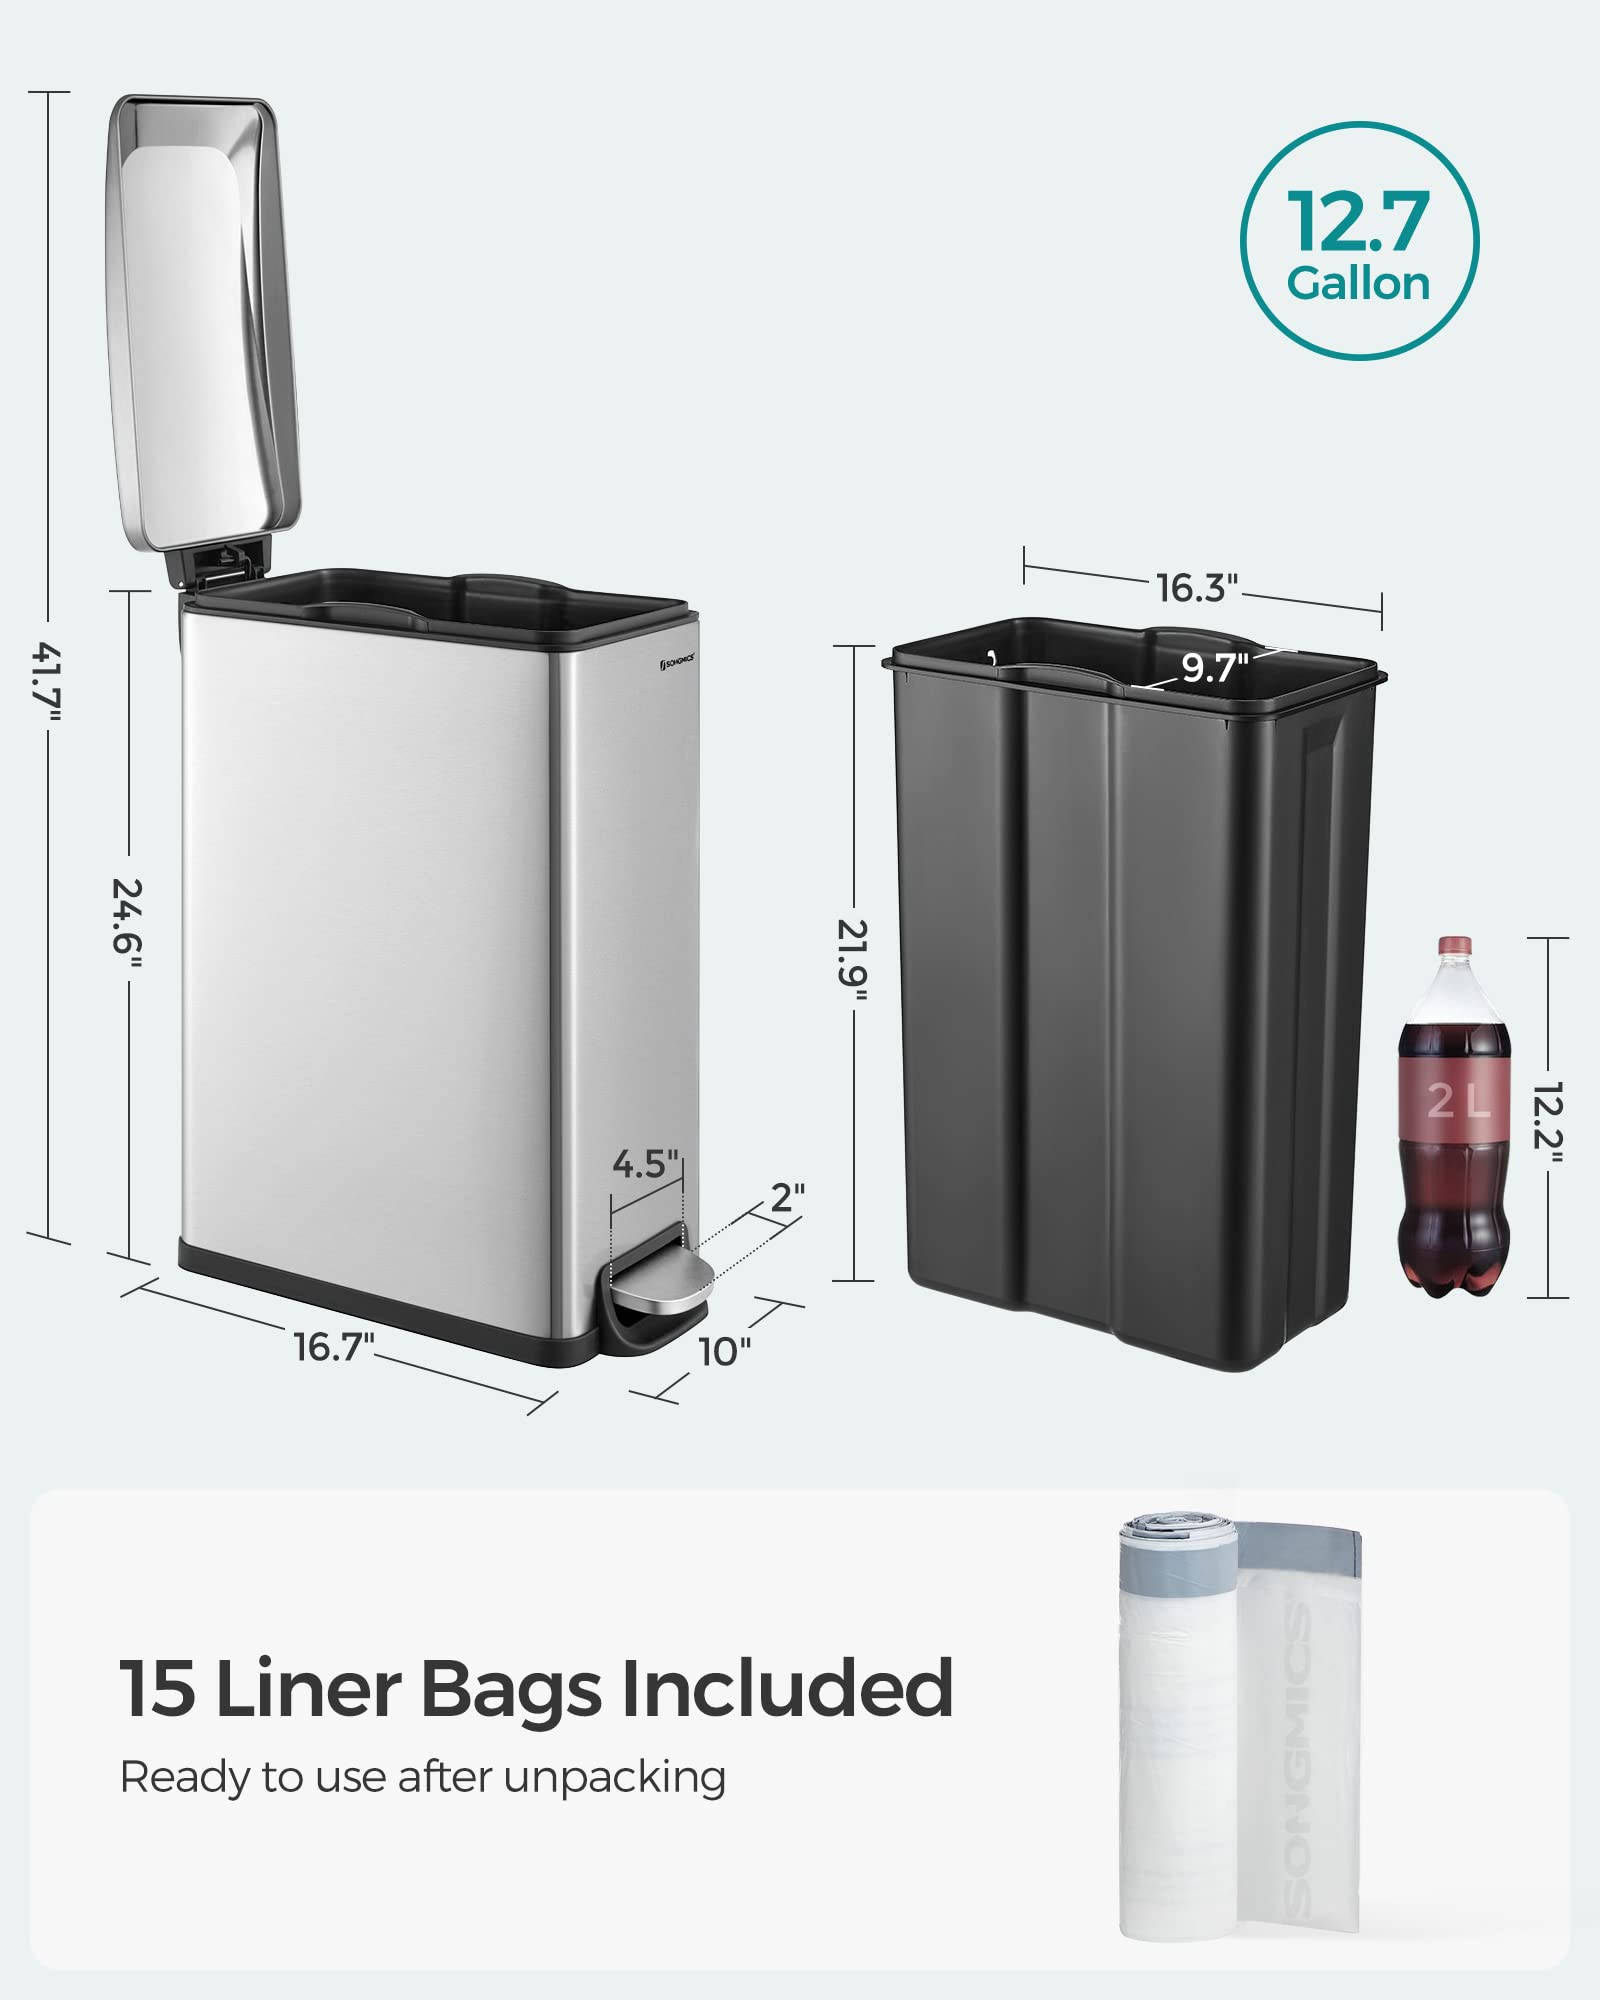 SONGMICS Slim Trash Can, 12.7 Gallon Garbage Can for Narrow Spaces with Soft-Close Lid, Inner Bucket, and Step-on Pedal, Stainless Steel, 15 Trash Bags Included, Silver ULTB510E48